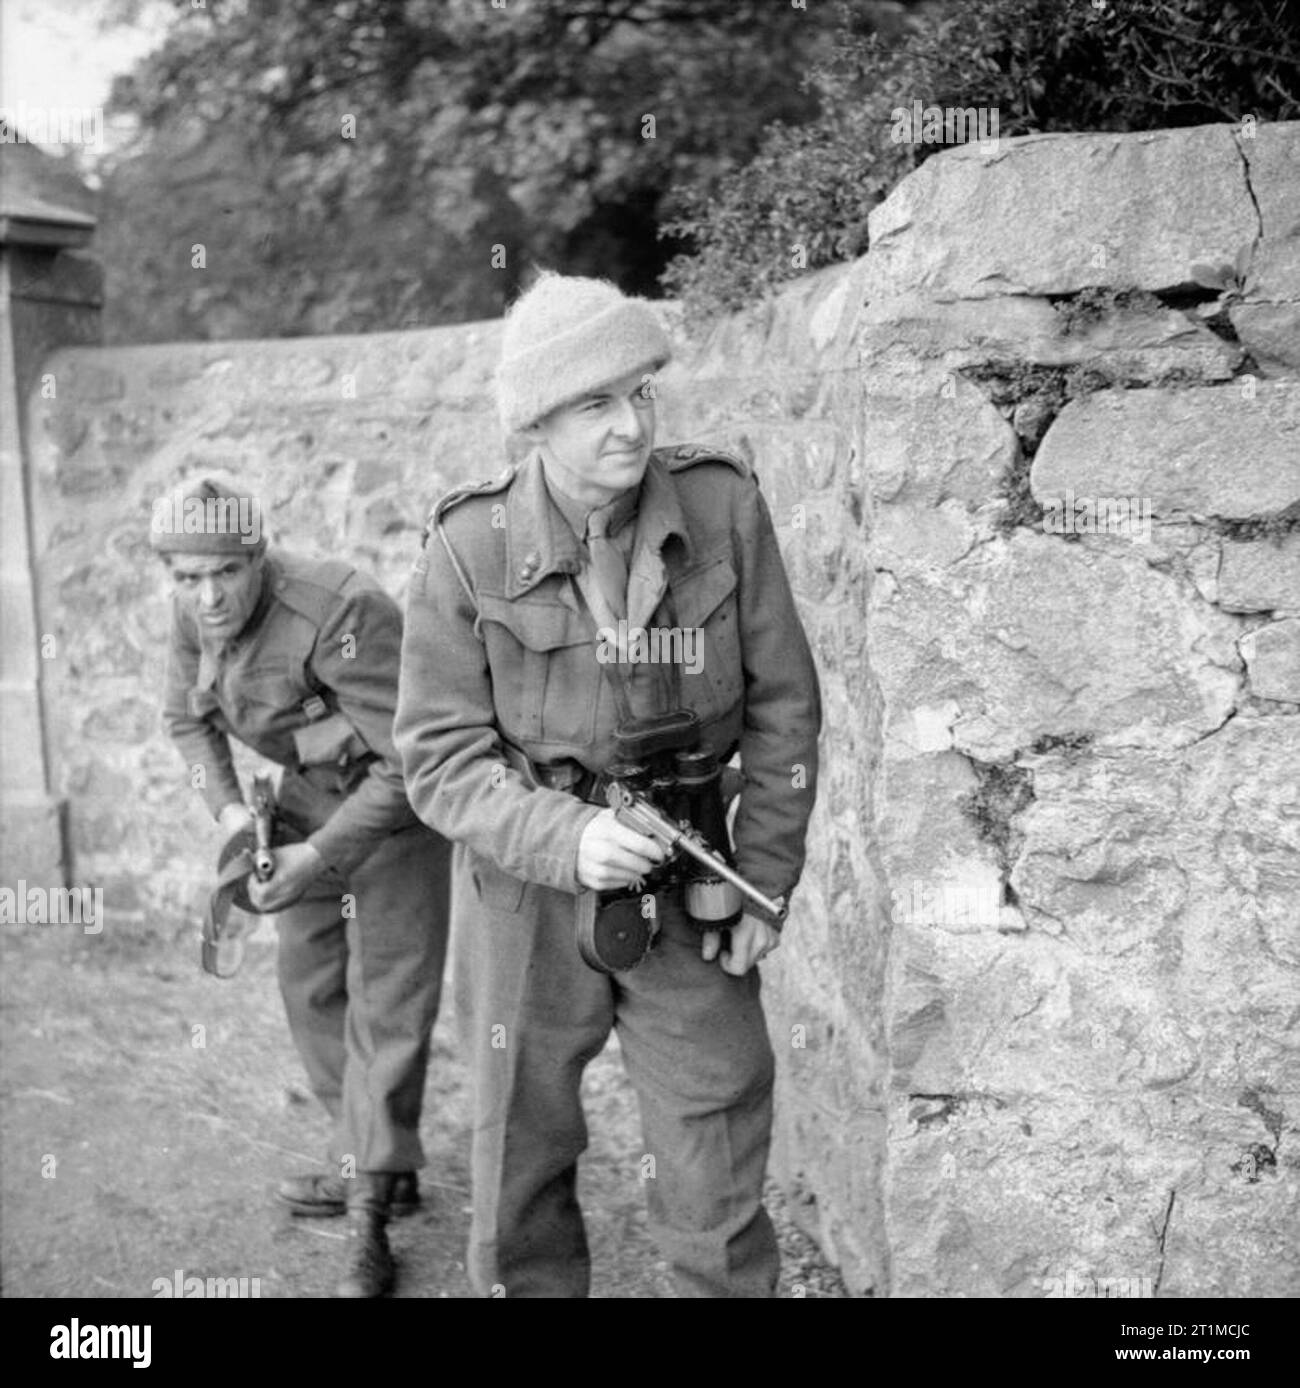 The British Army in the United Kingdom 1939-45 Captain Gerald C S Montanaro of 101 Troop, Special Service Brigade, leads one of his men during combined operations training in the presence of the King at Inverary in Scotland, 9 October 1941. The officer is carrying a Luger pistol with drum magazine. Stock Photo